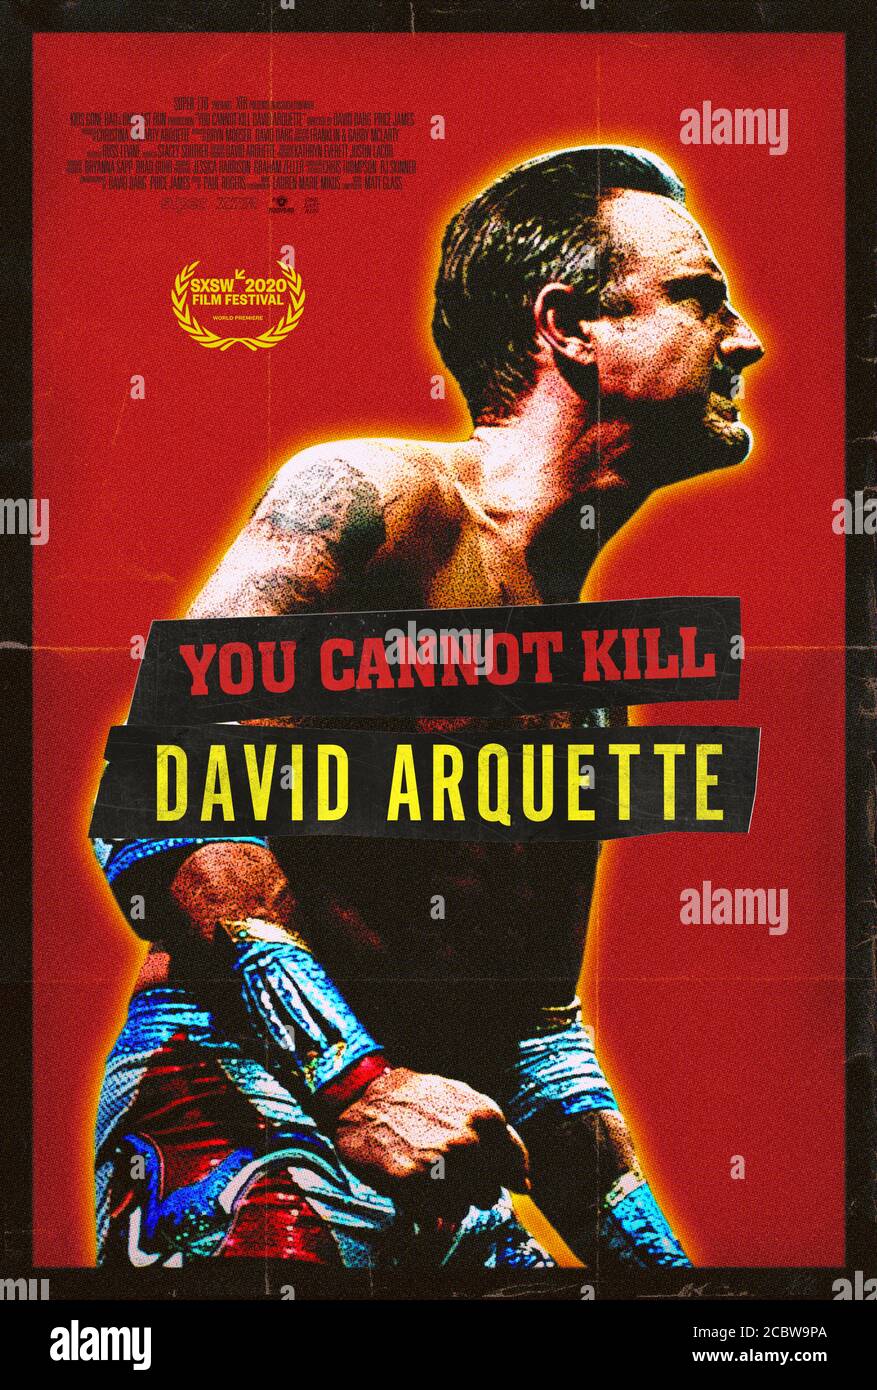 You Cannot Kill David Arquette (2020) directed by David Darg and Price James and starring David Arquette, Patricia Arquette and Courteney Cox. Documentary following David Arquette's return to professional wrestling after his acting career begins to wain. Stock Photo